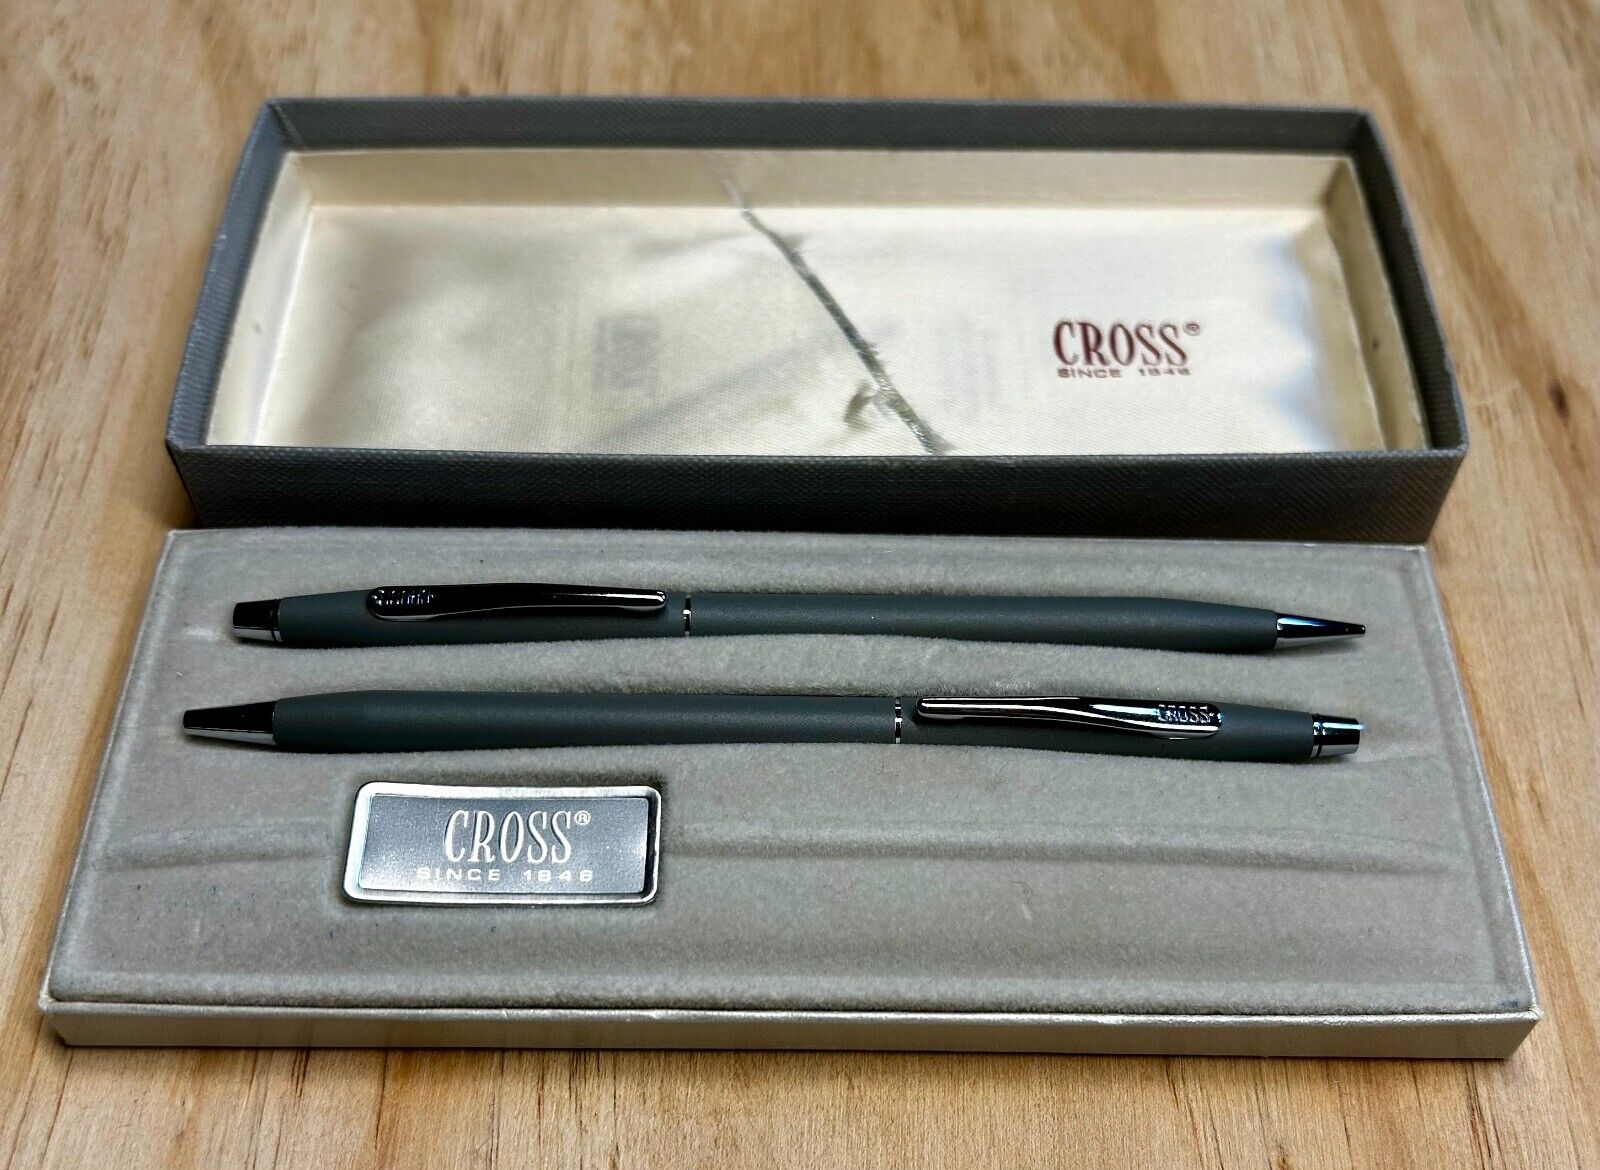 Vintage 1970s CROSS PEN SET TWO PENS WITH BOX GRAY 2101 